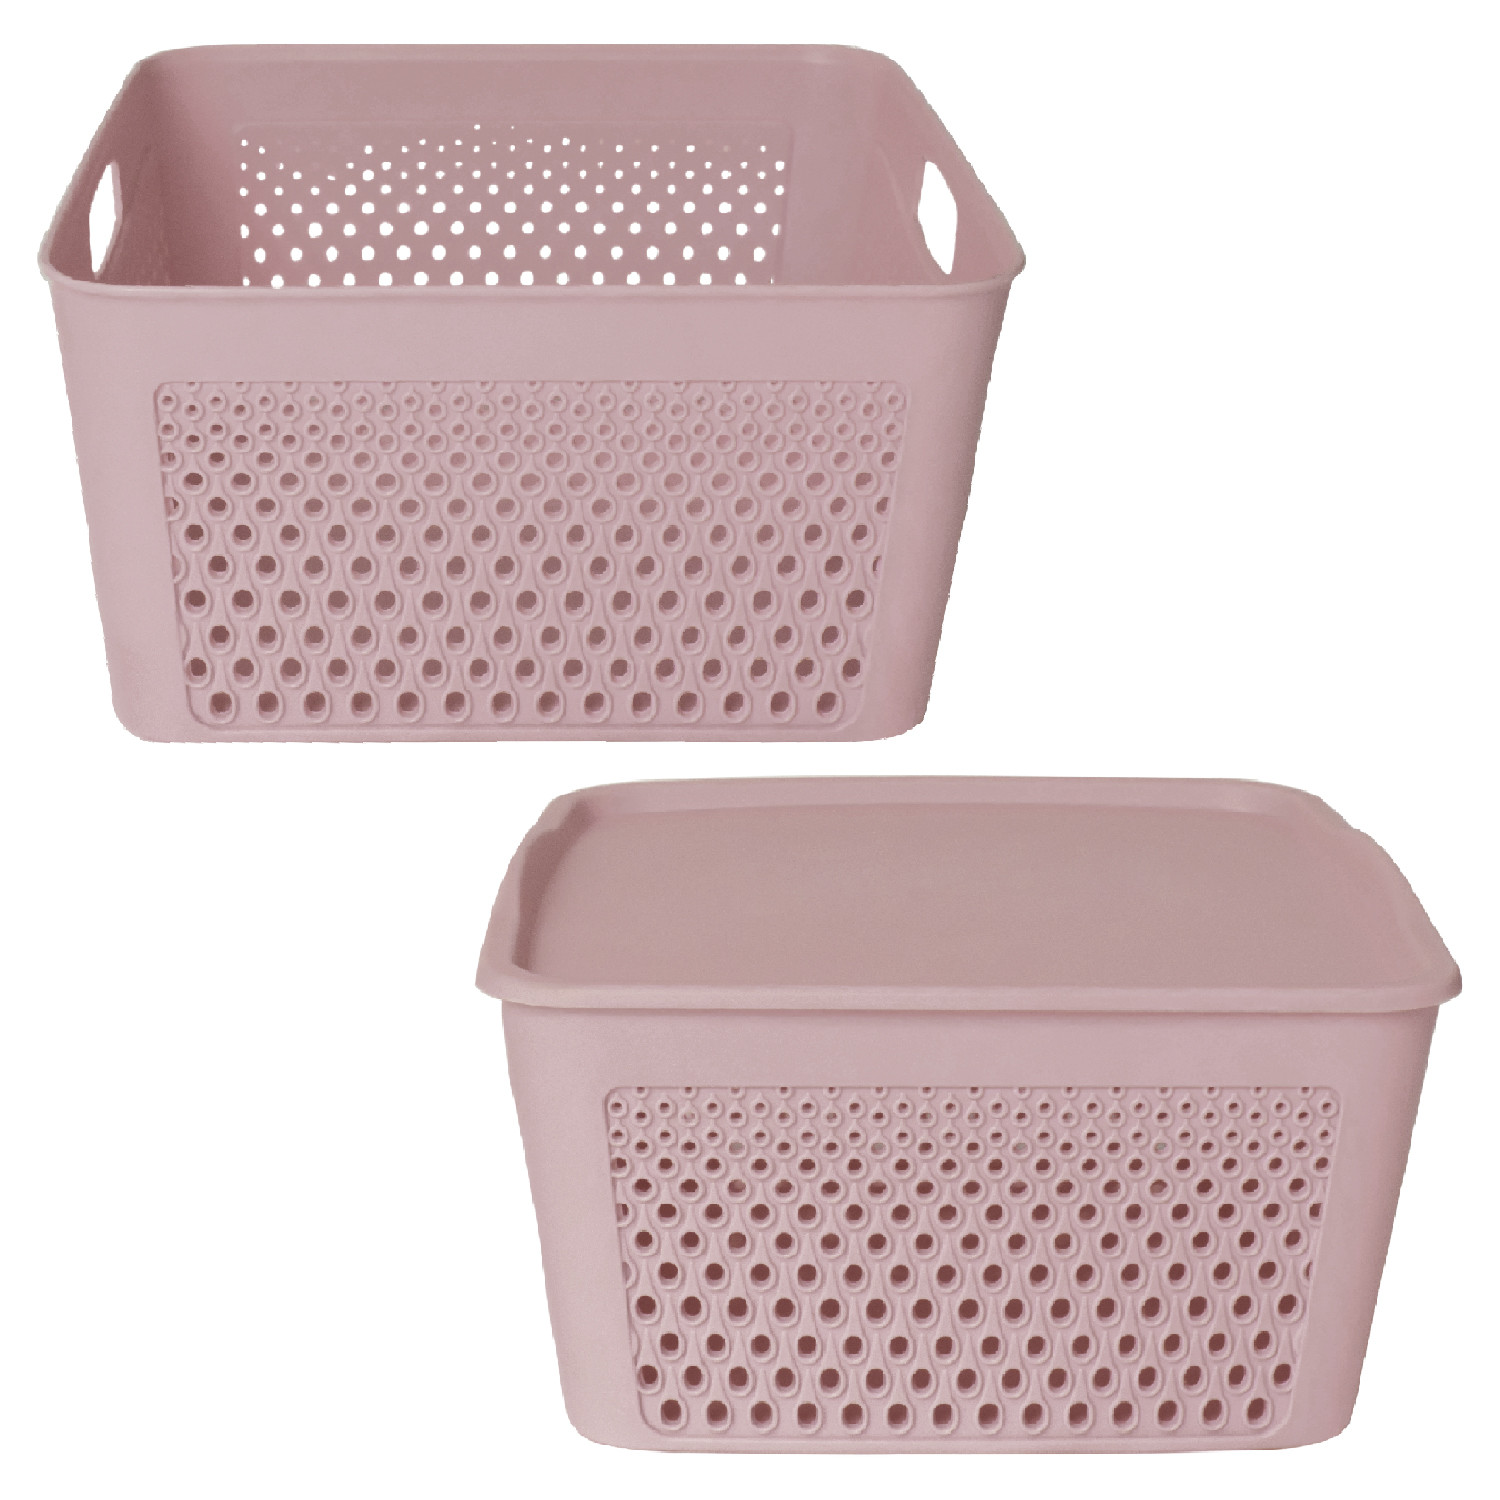 Kuber Industries Netted Design Unbreakable Multipurpose Square Shape Plastic Storage Baskets with lid Small (Grey)